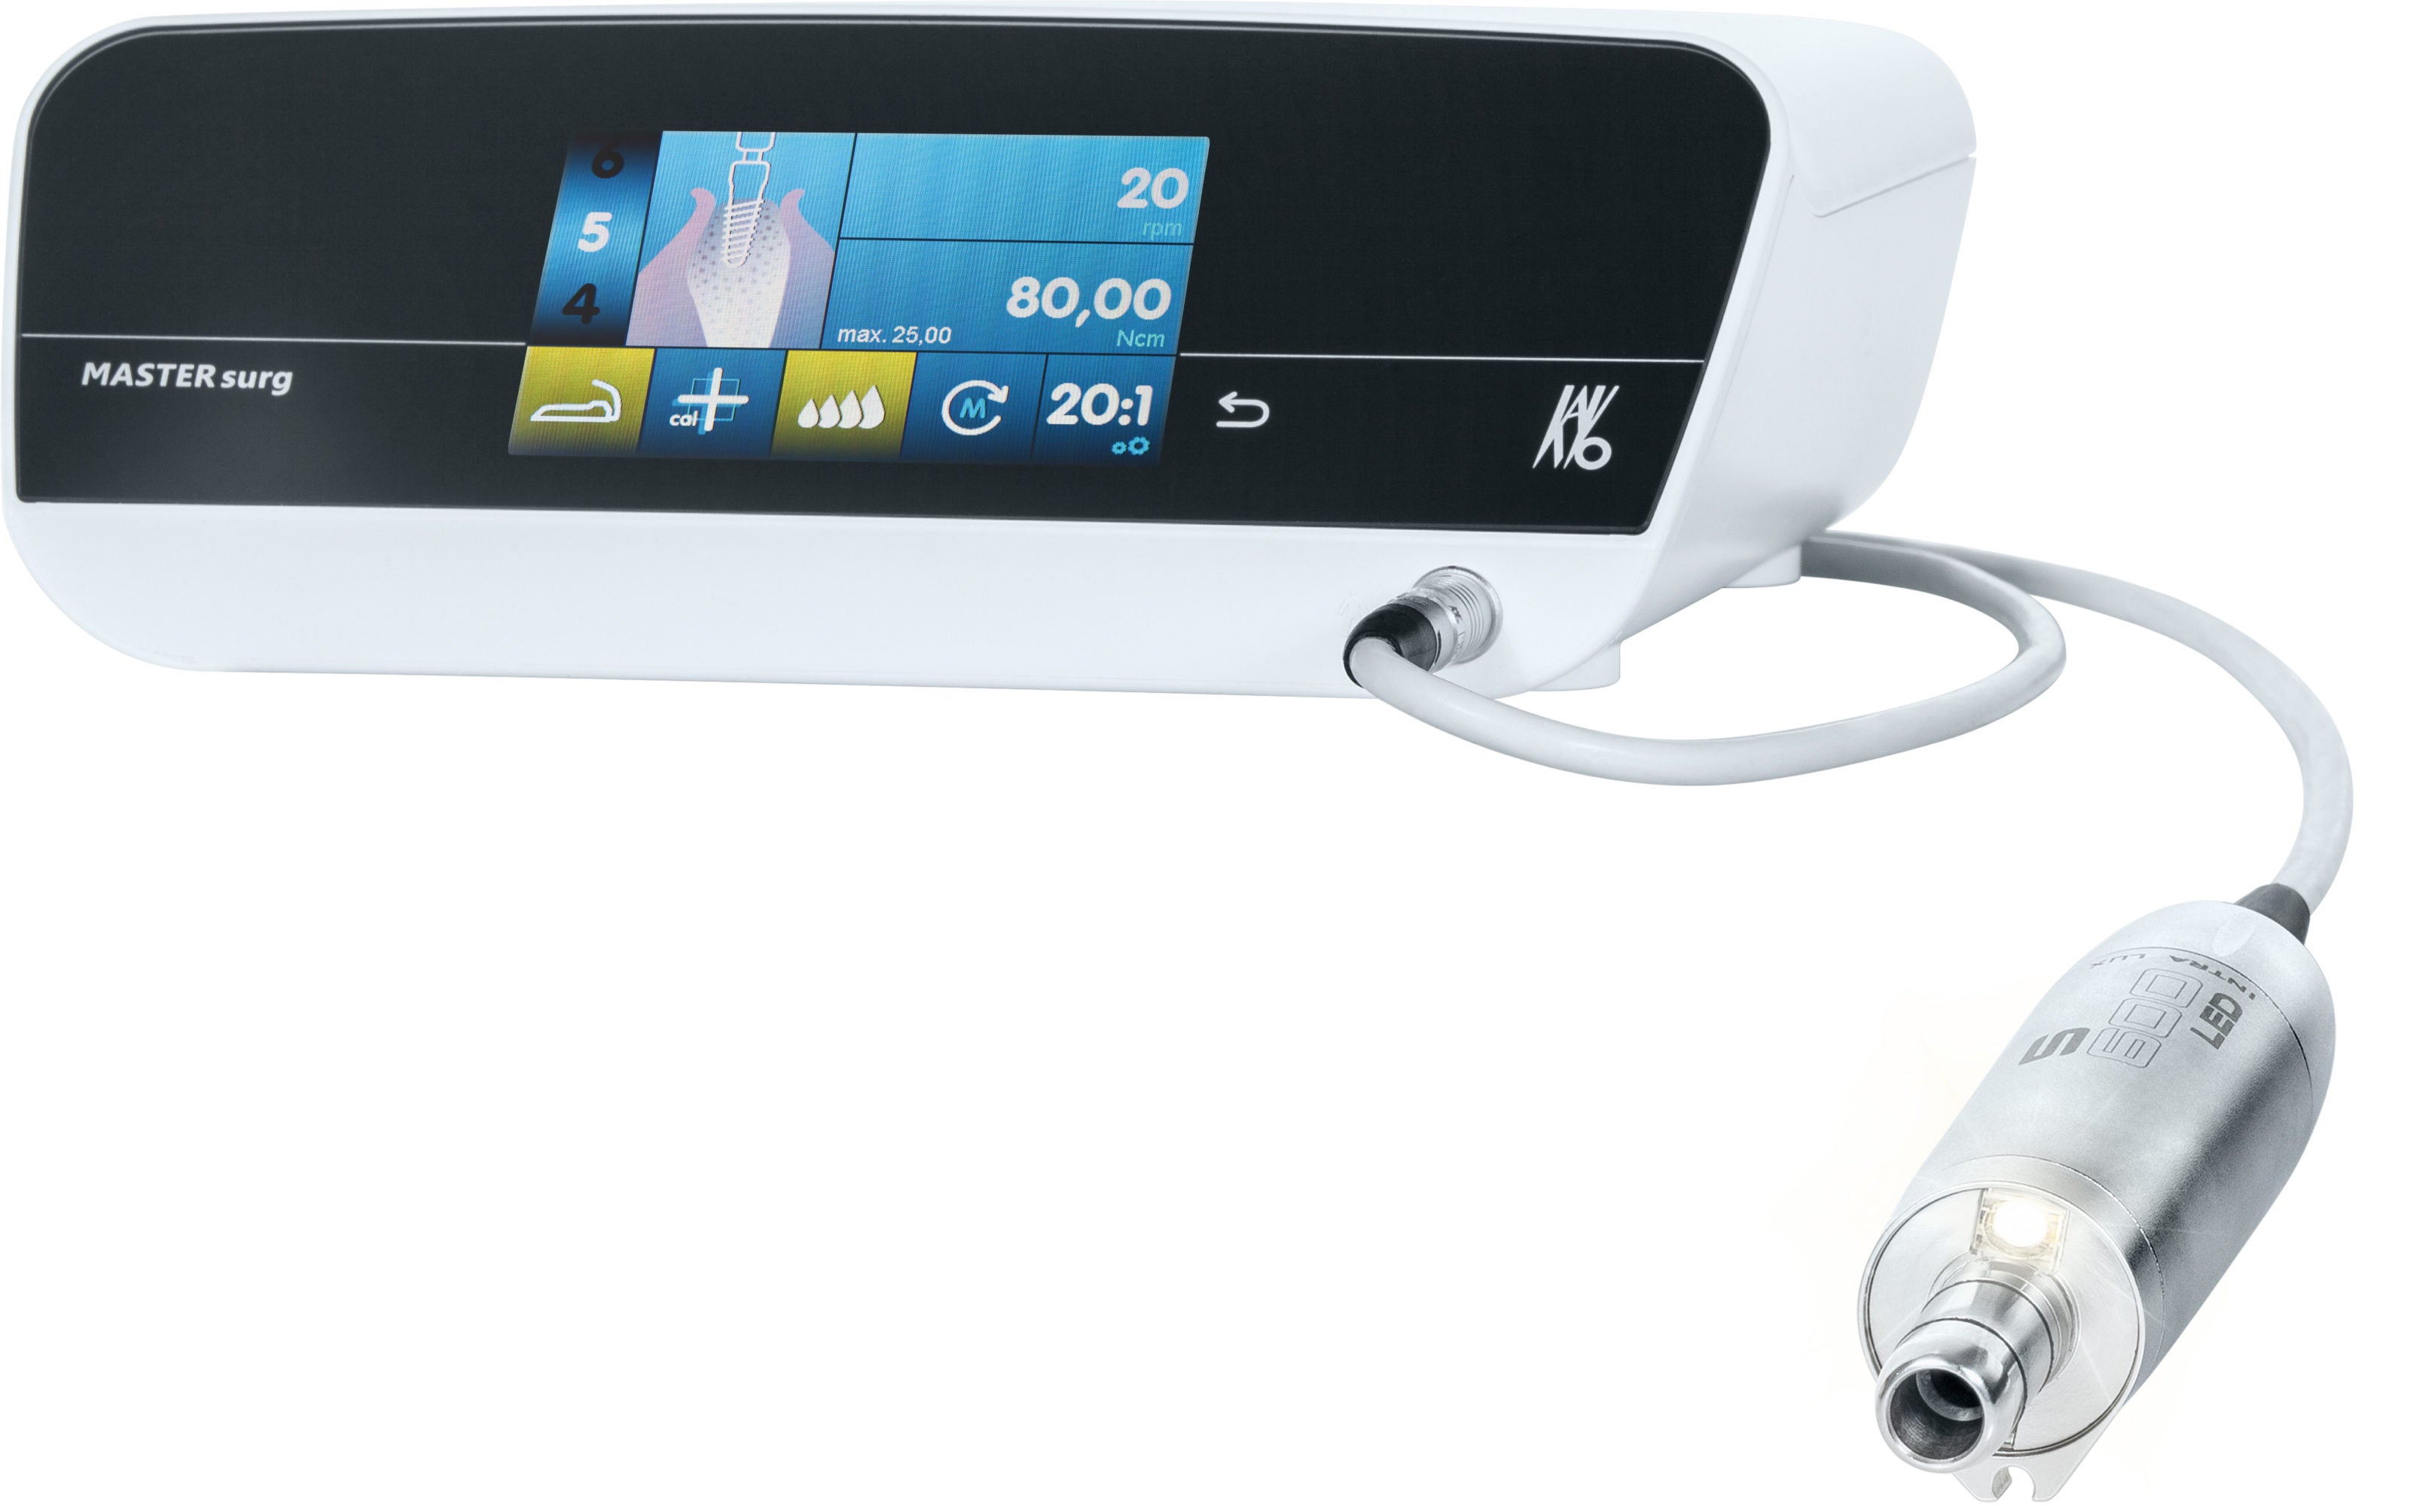 KaVo MASTERsurg LUX Wireless Surgical System